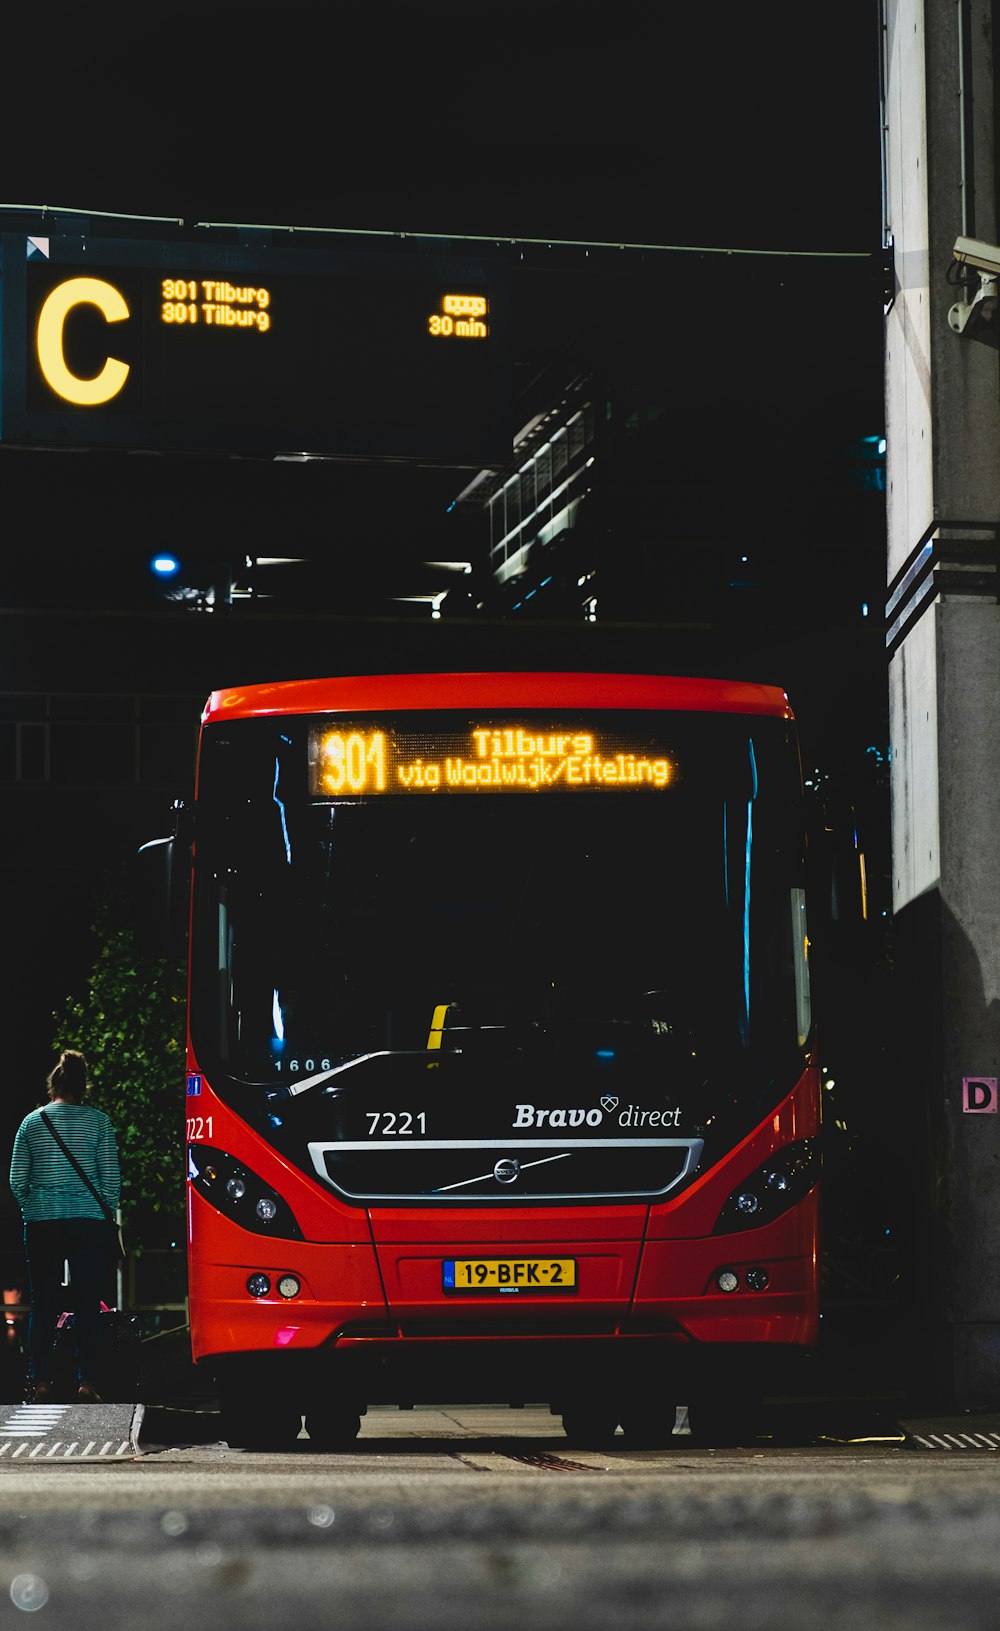 red and black double decker bus